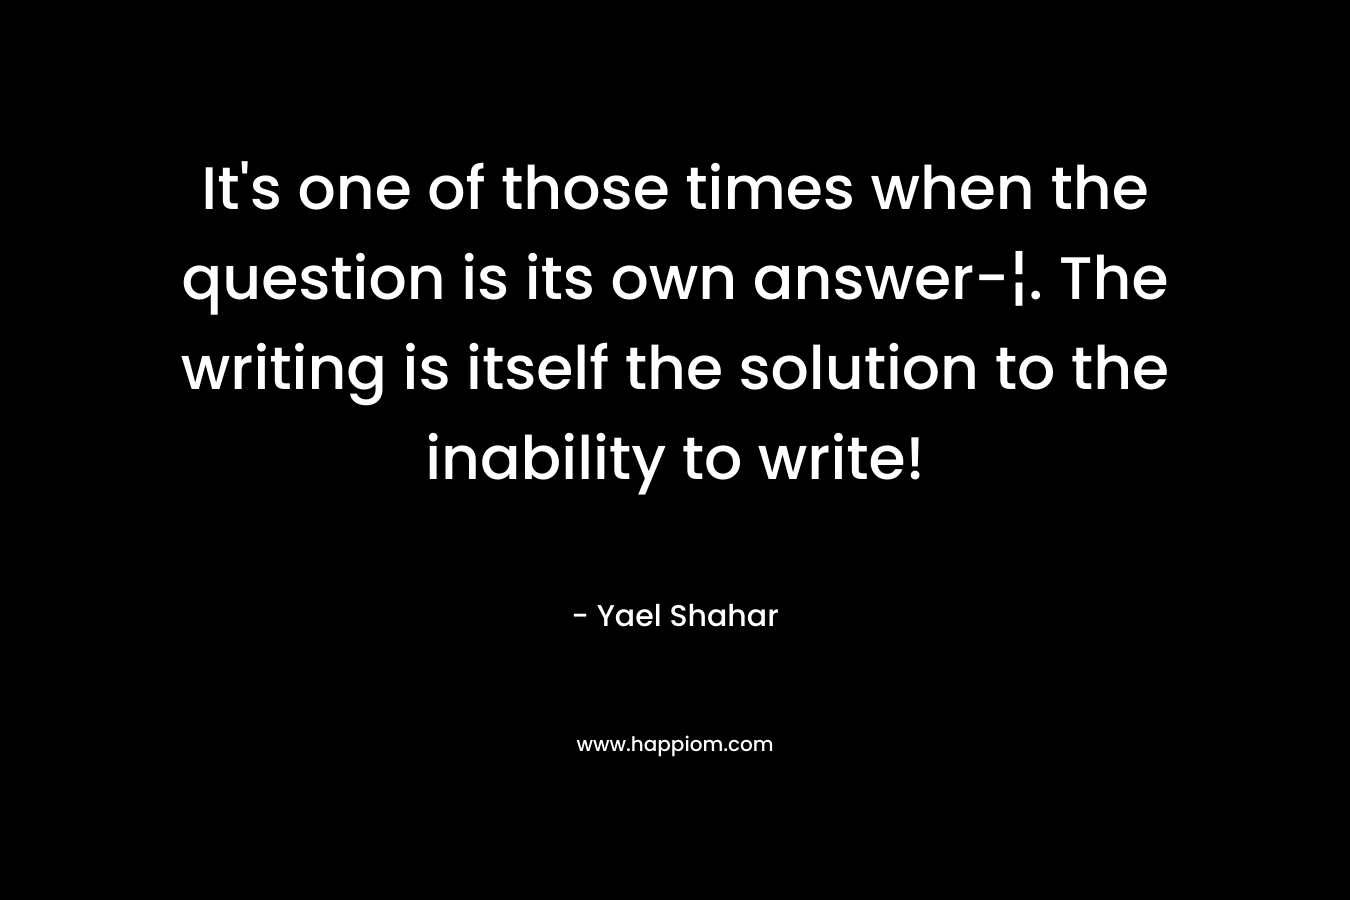 It’s one of those times when the question is its own answer-¦. The writing is itself the solution to the inability to write! – Yael Shahar